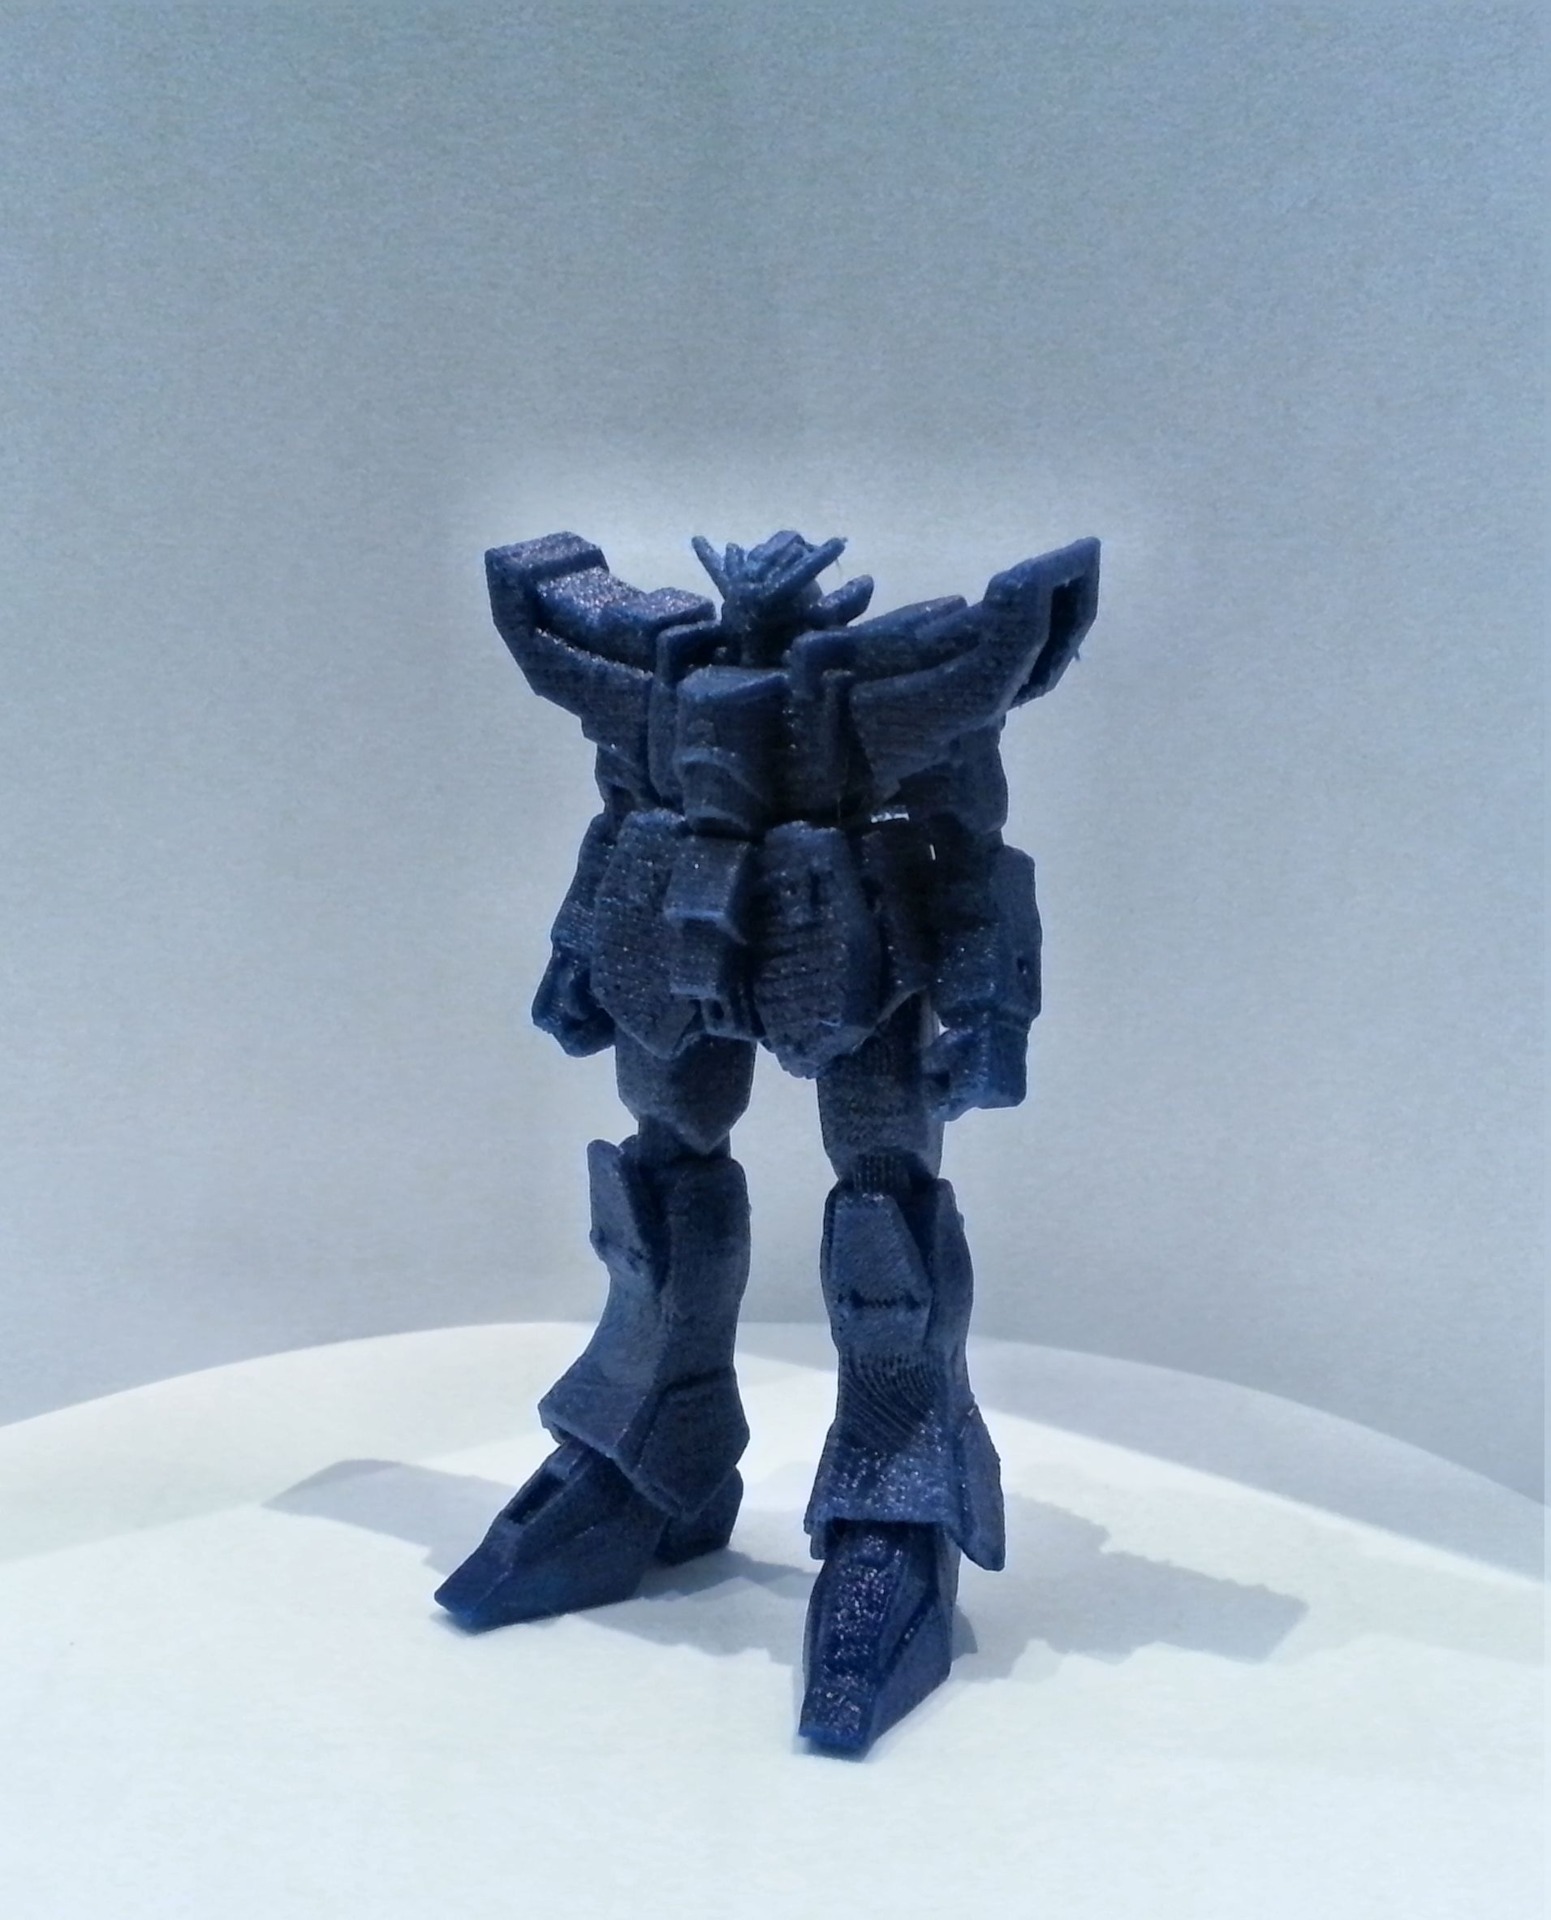 The model is 10.5 cm or about 4 inches tall